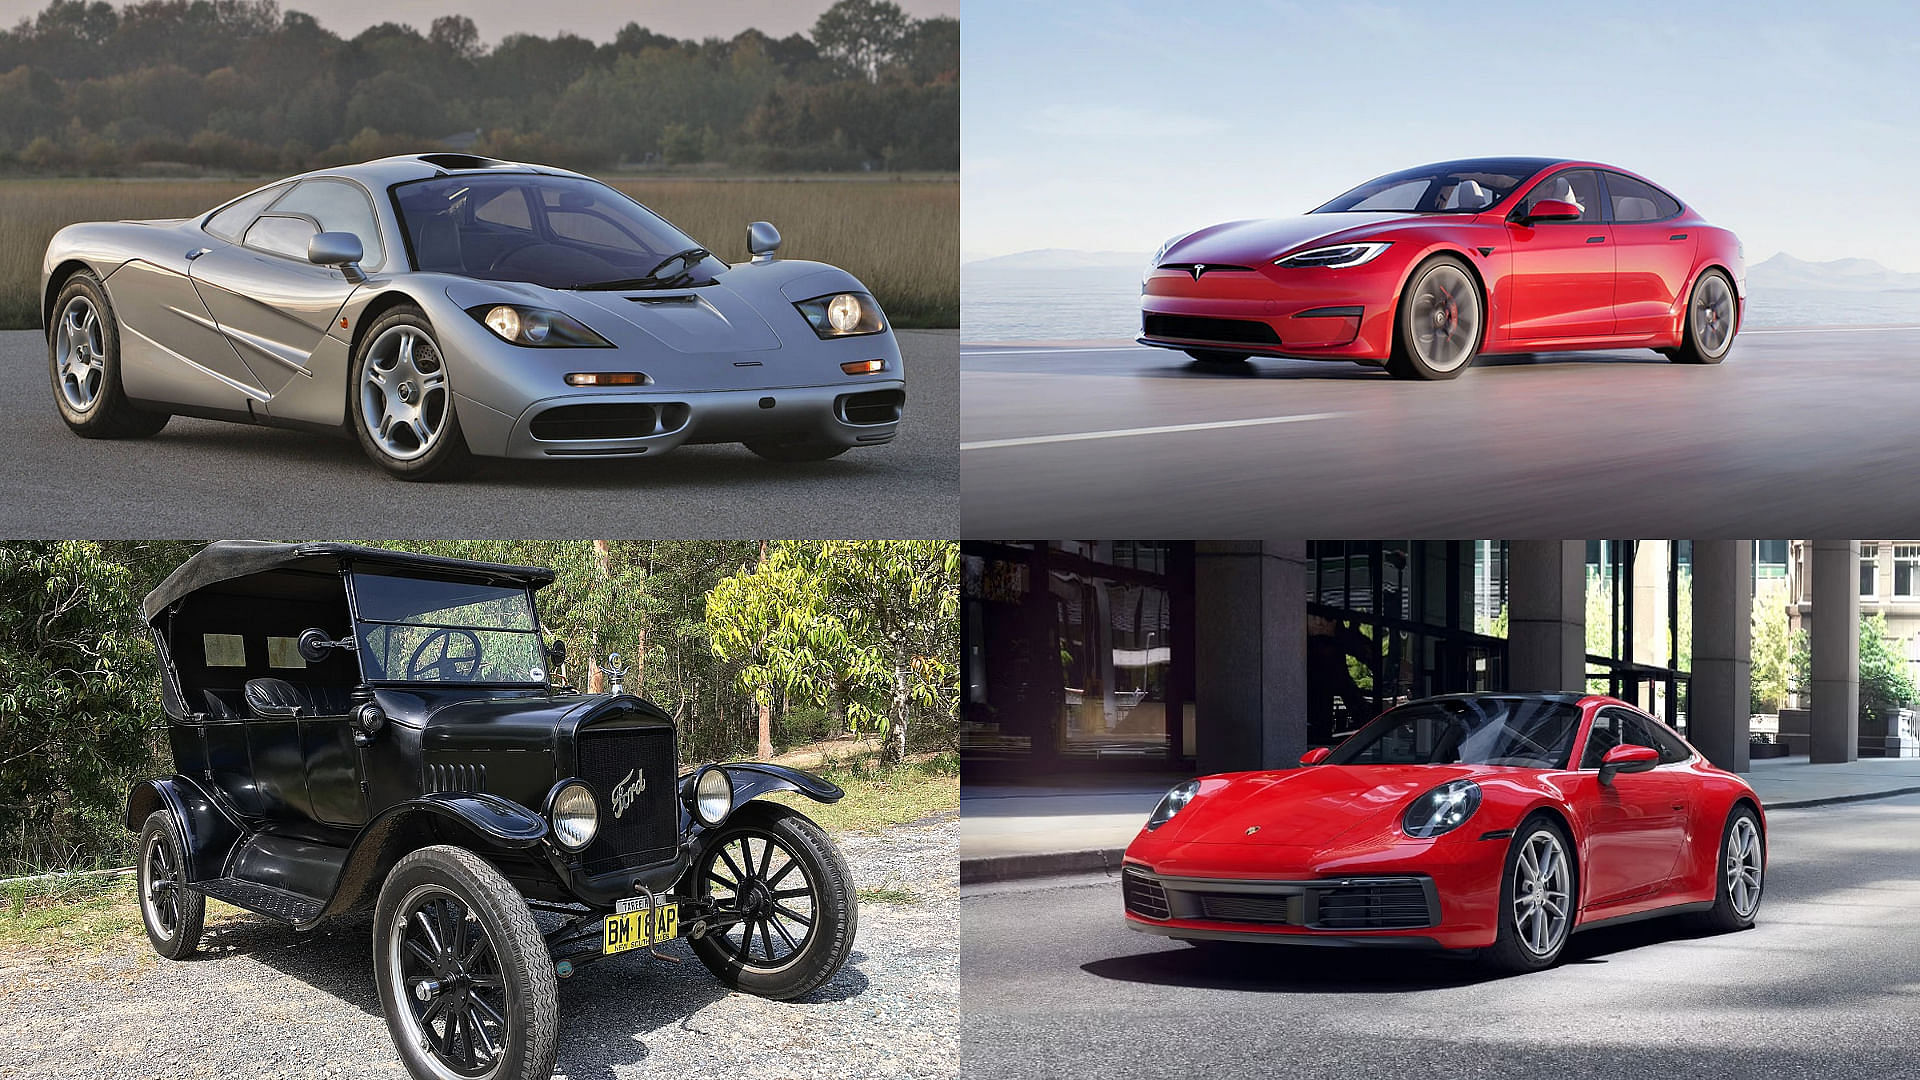 Elon Musk’s car collection includes 1997 McLaren F1, 2019 Tesla Model S Performance, 1920 Ford Model T and 2012 Porsche 911 Turbo